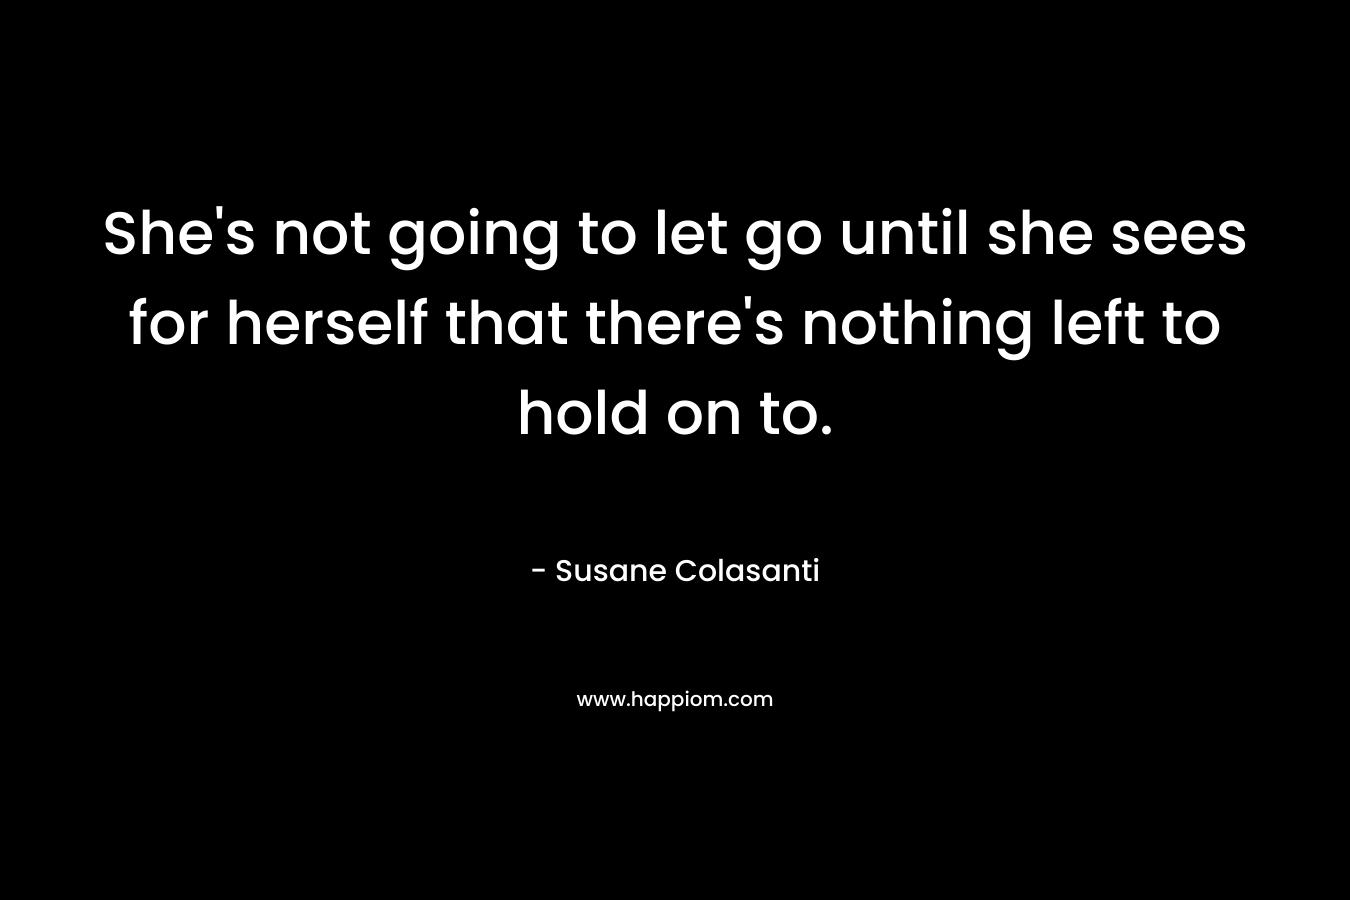 She’s not going to let go until she sees for herself that there’s nothing left to hold on to. – Susane Colasanti